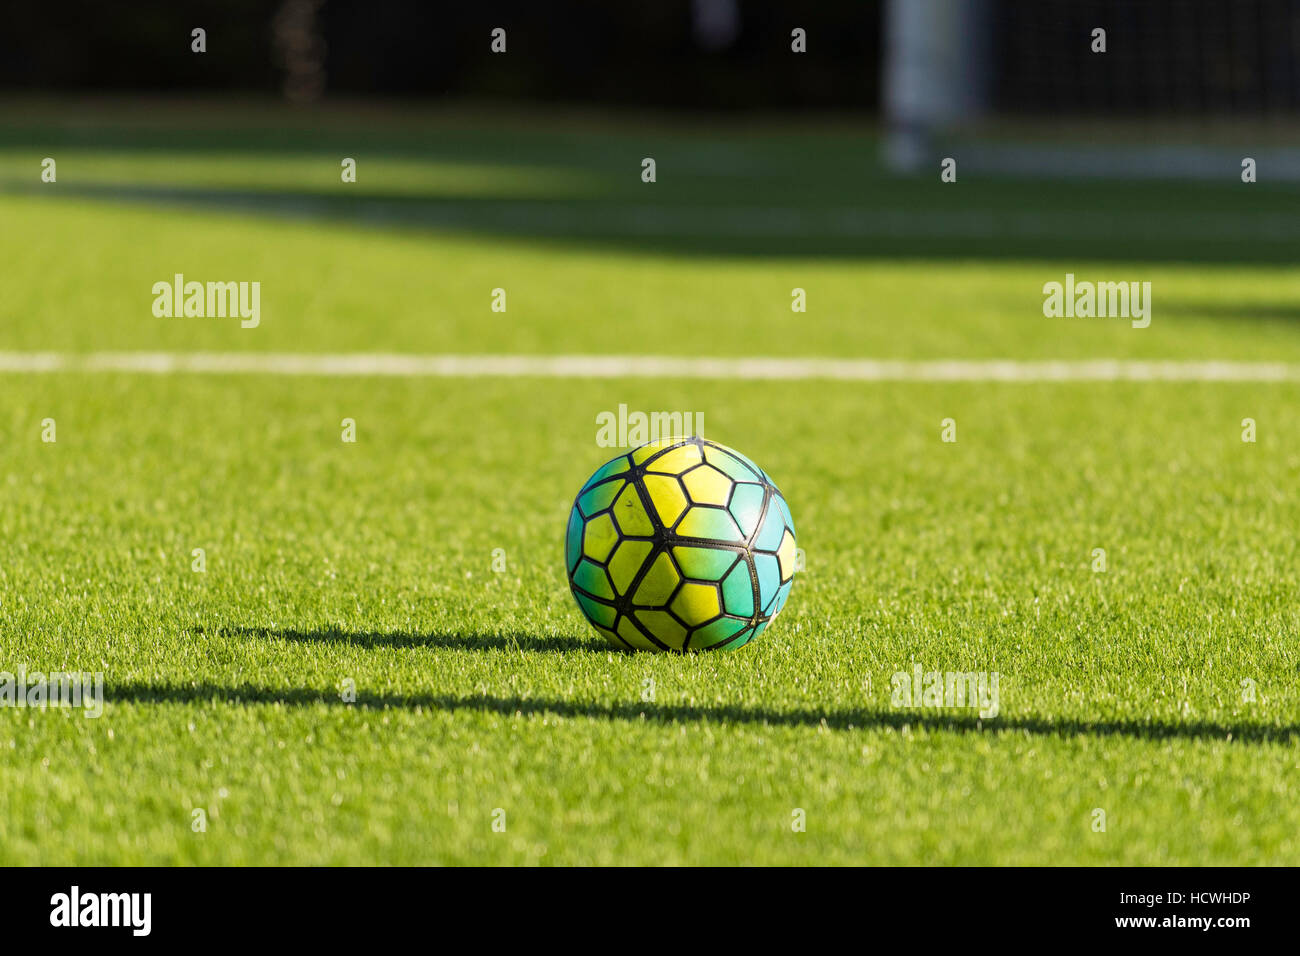 A multicoloured soccer ball on an astro turf soccer field in afternoon sun Stock Photo